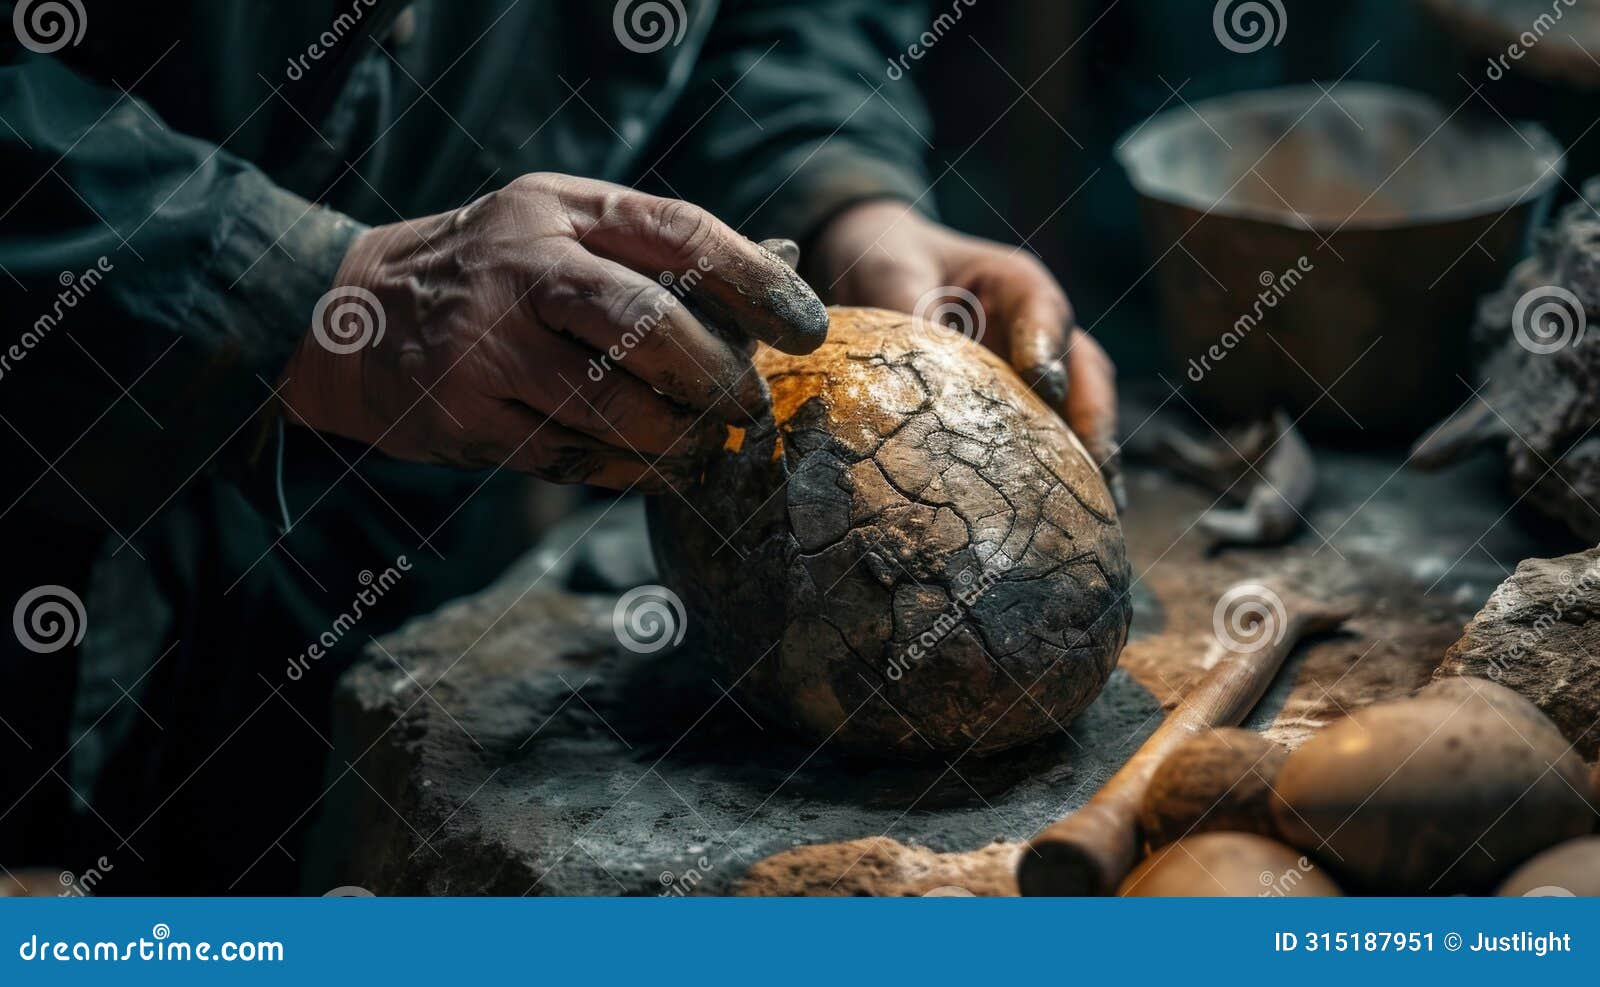 a paleontologist carefully cleaning and preserving a fossilized egg izing the commitment to conserving even the